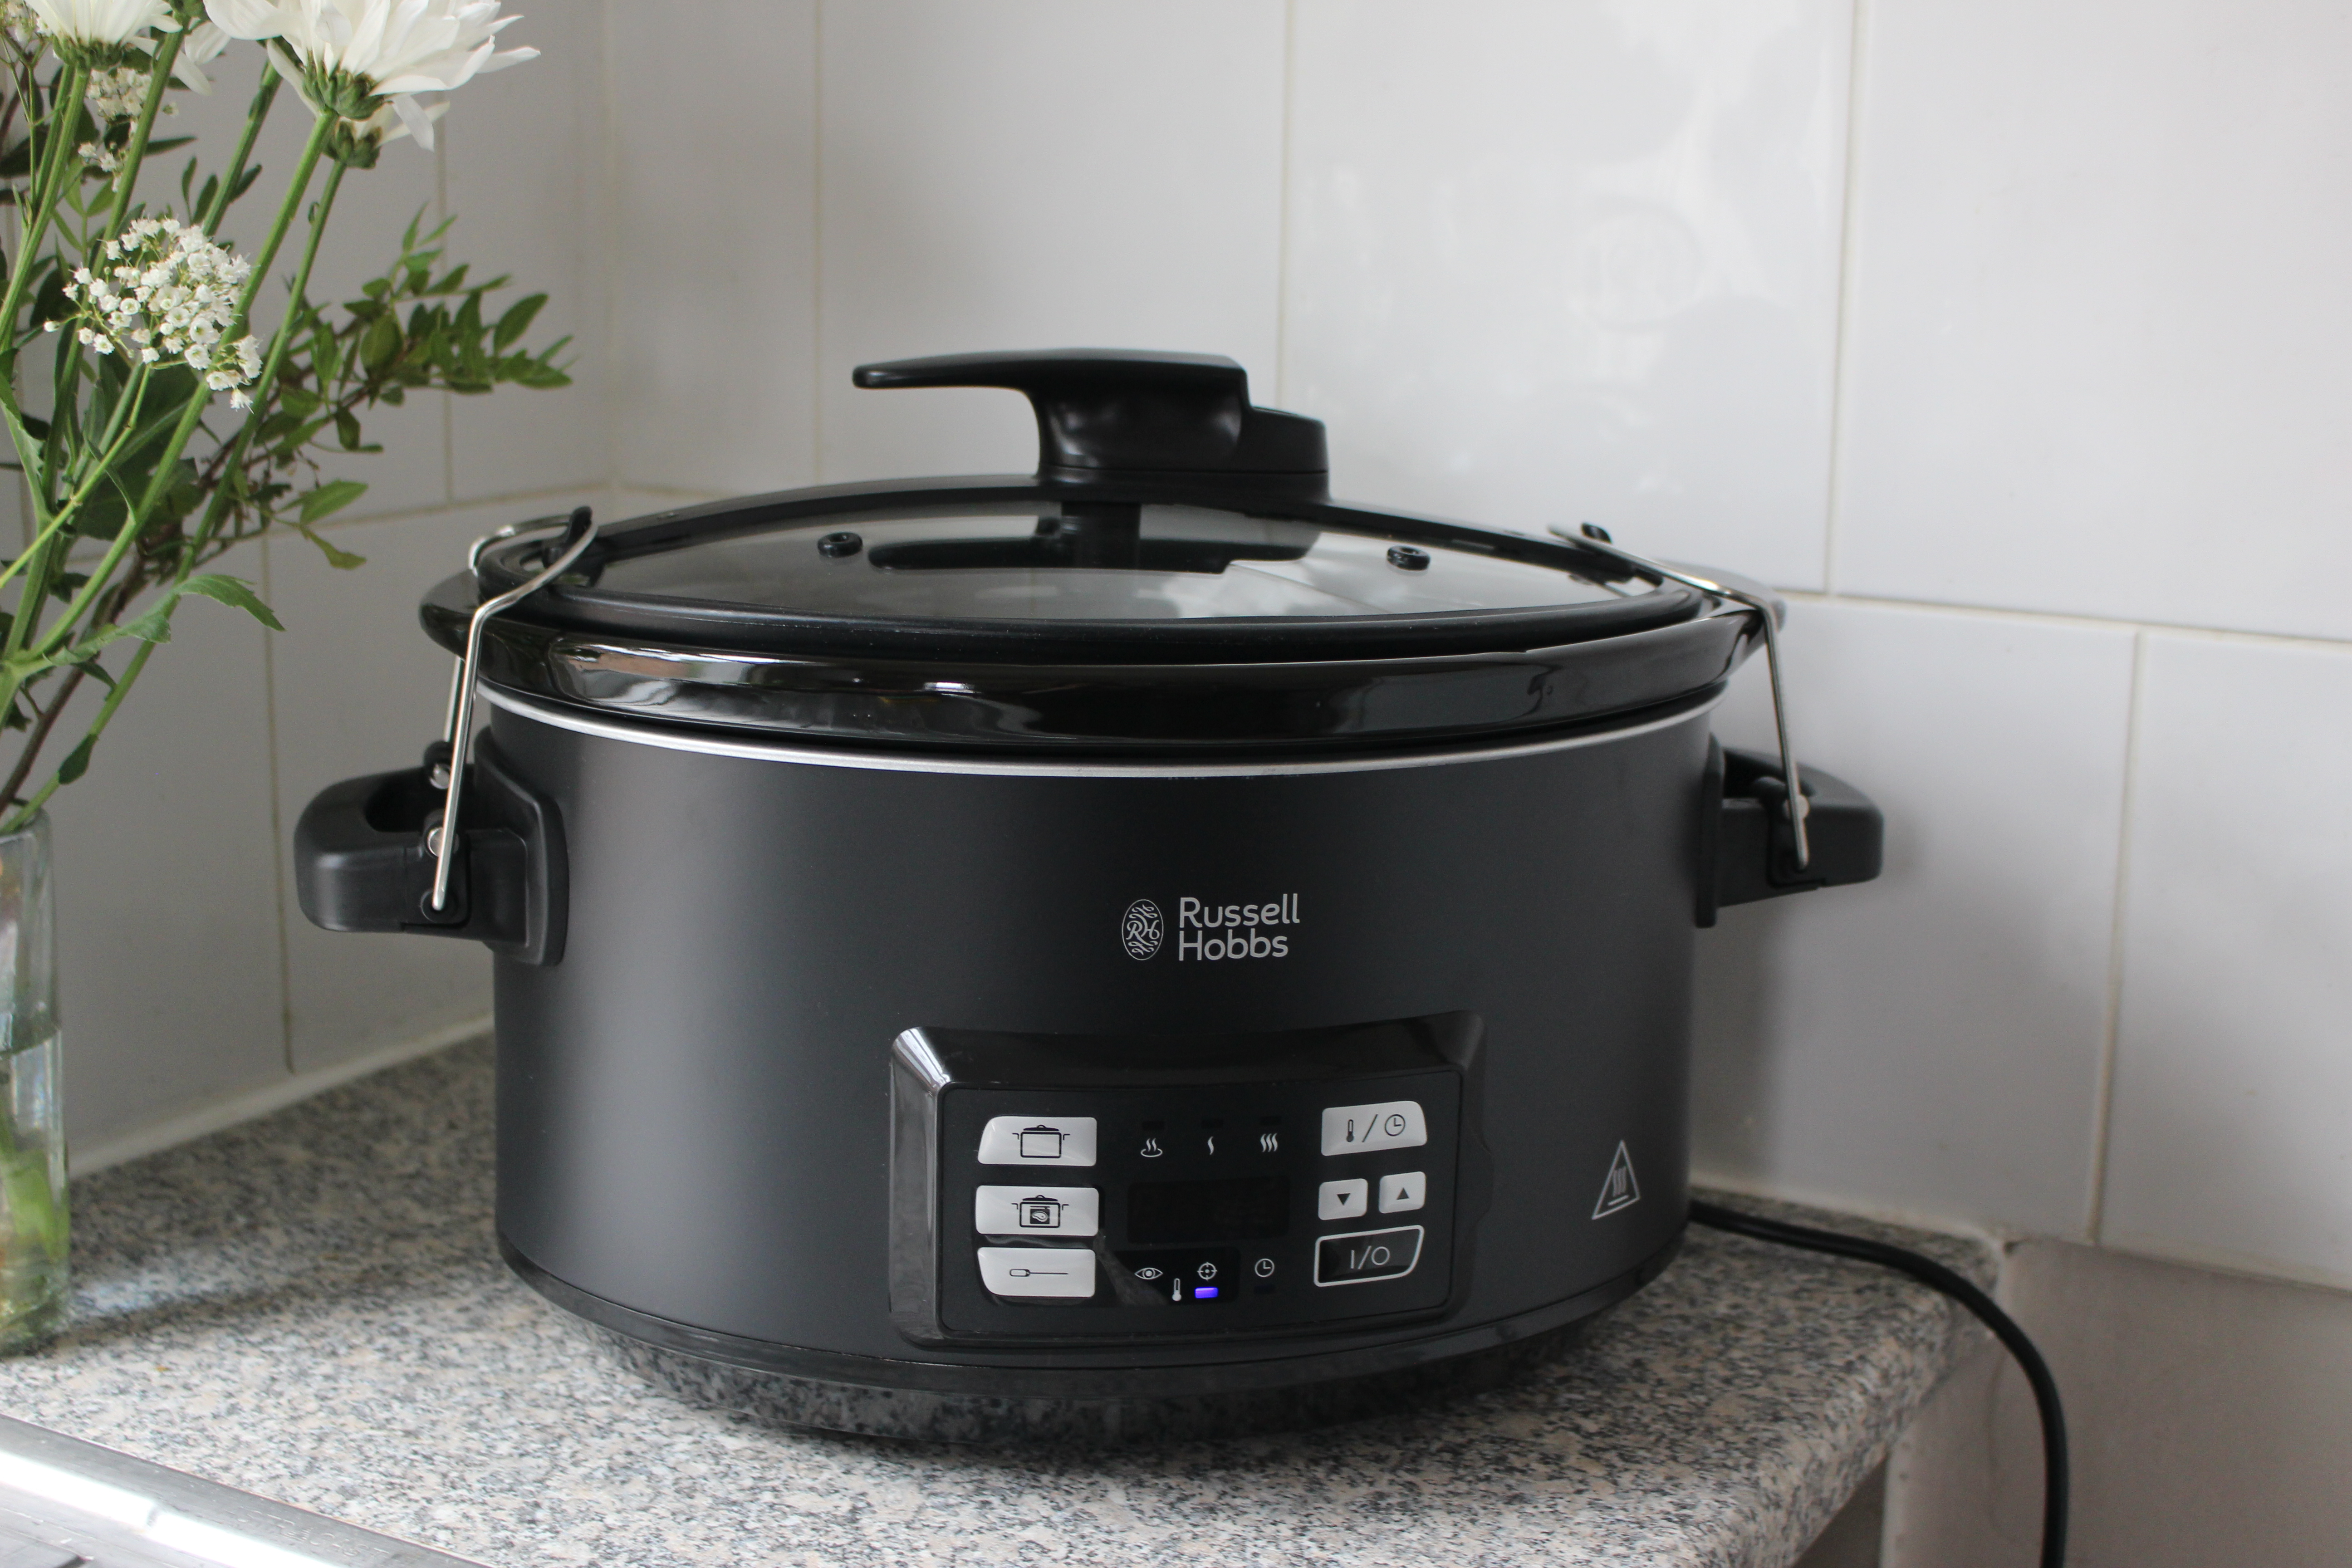 How to Sous Vide? With the Russell Hobbs Master Slow Cooker & Sous